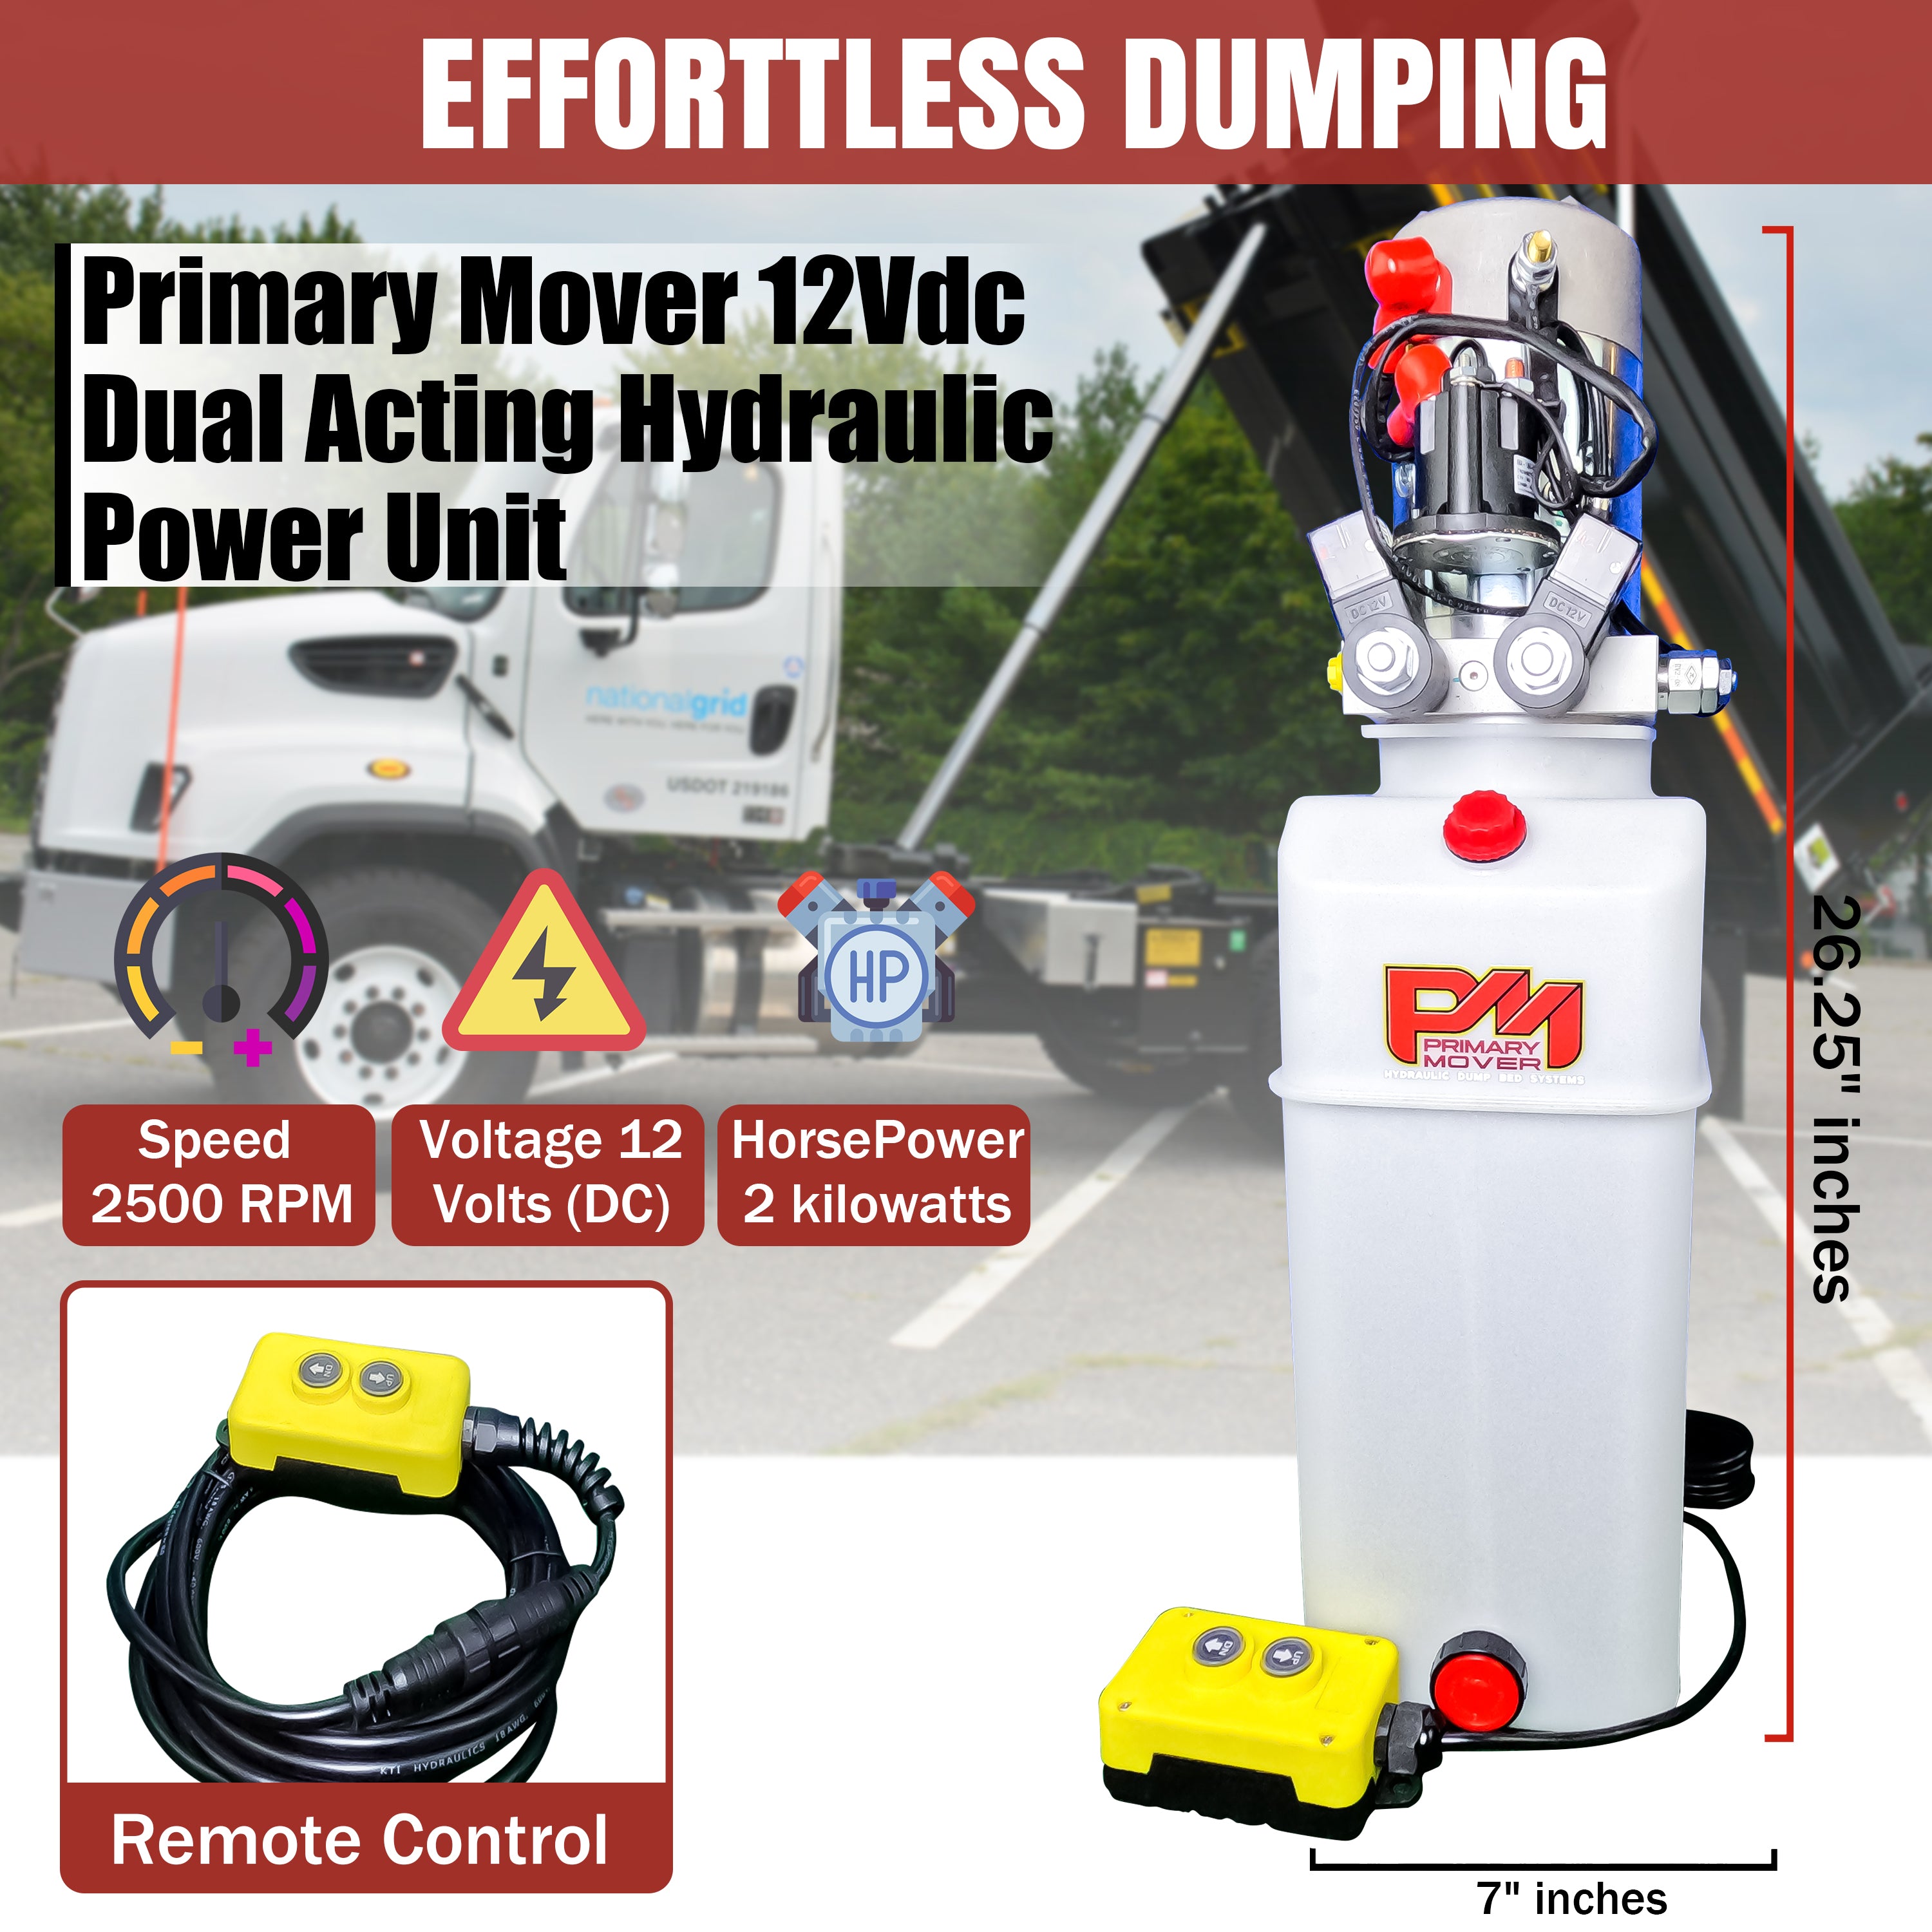 Primary Mover 12V Double-Acting Hydraulic Pump - Poly Reservoir: Dual-acting precision for hydraulic dump bed systems. Crafted for efficiency and reliability, offering unbeatable value and durability.